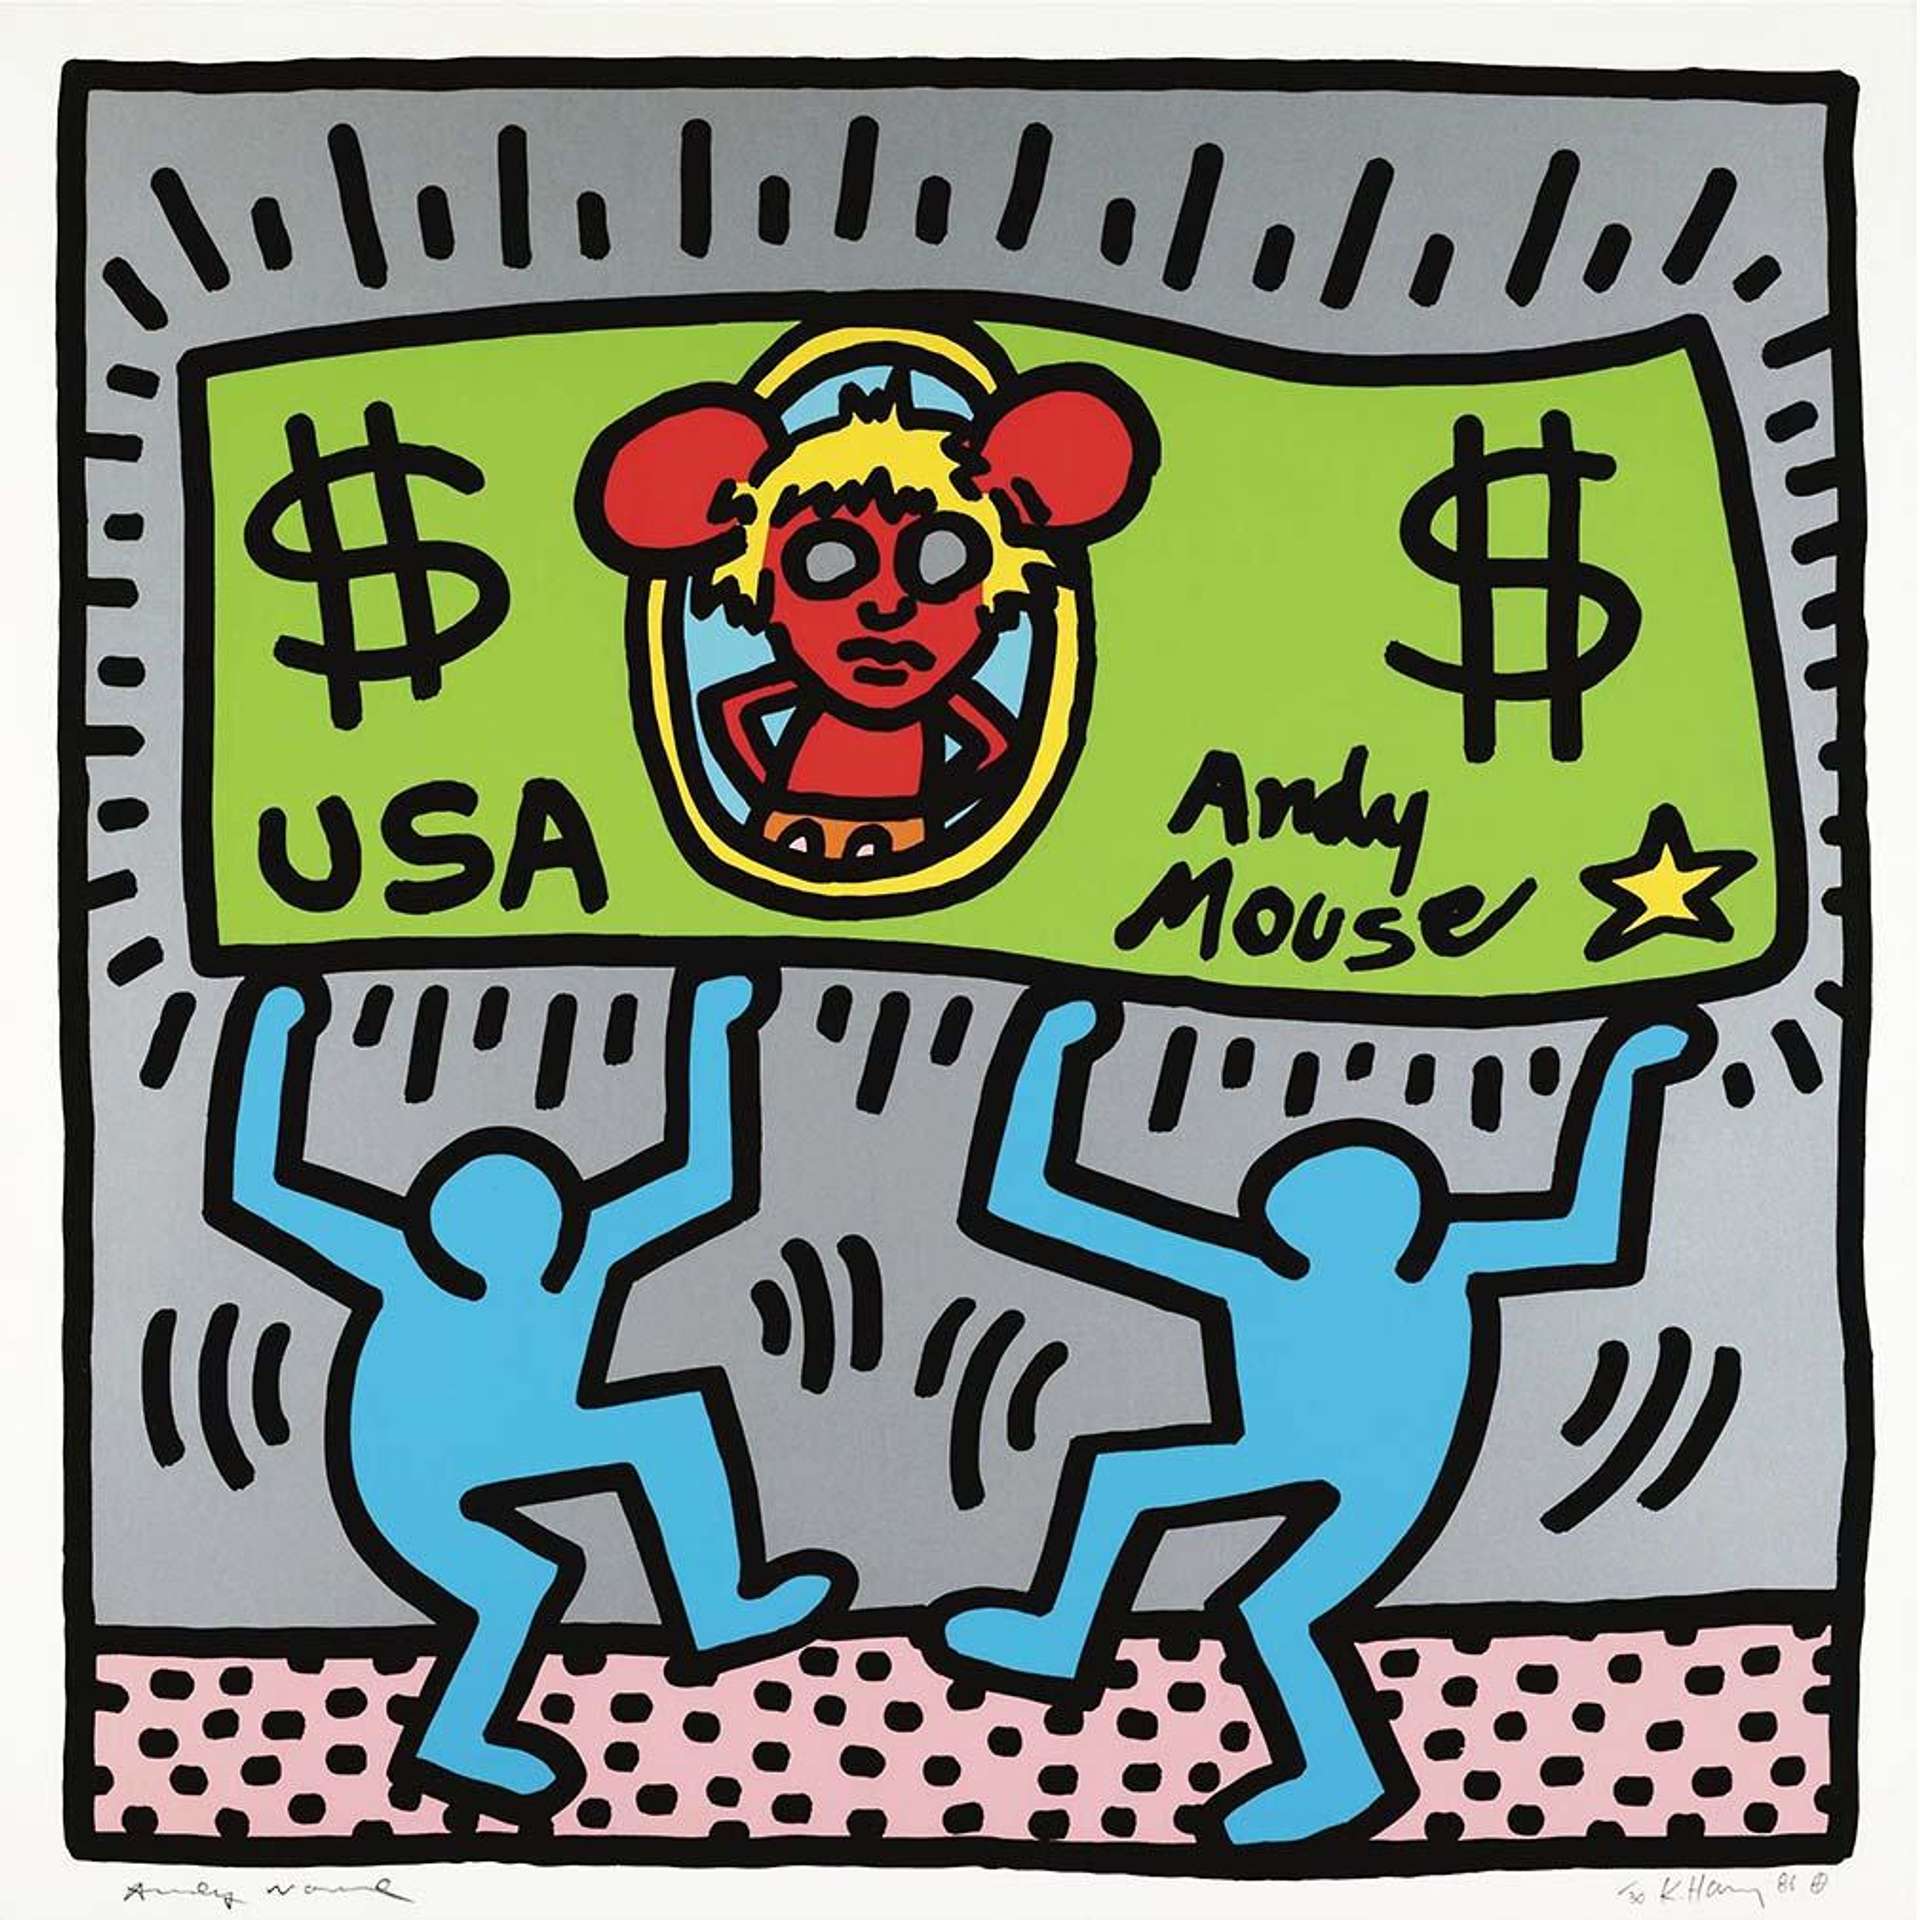 This print features two dancing figures holding aloft a large dollar bill with the figure of a spiky haired Andy Warhol with Mickey Mouse ears.